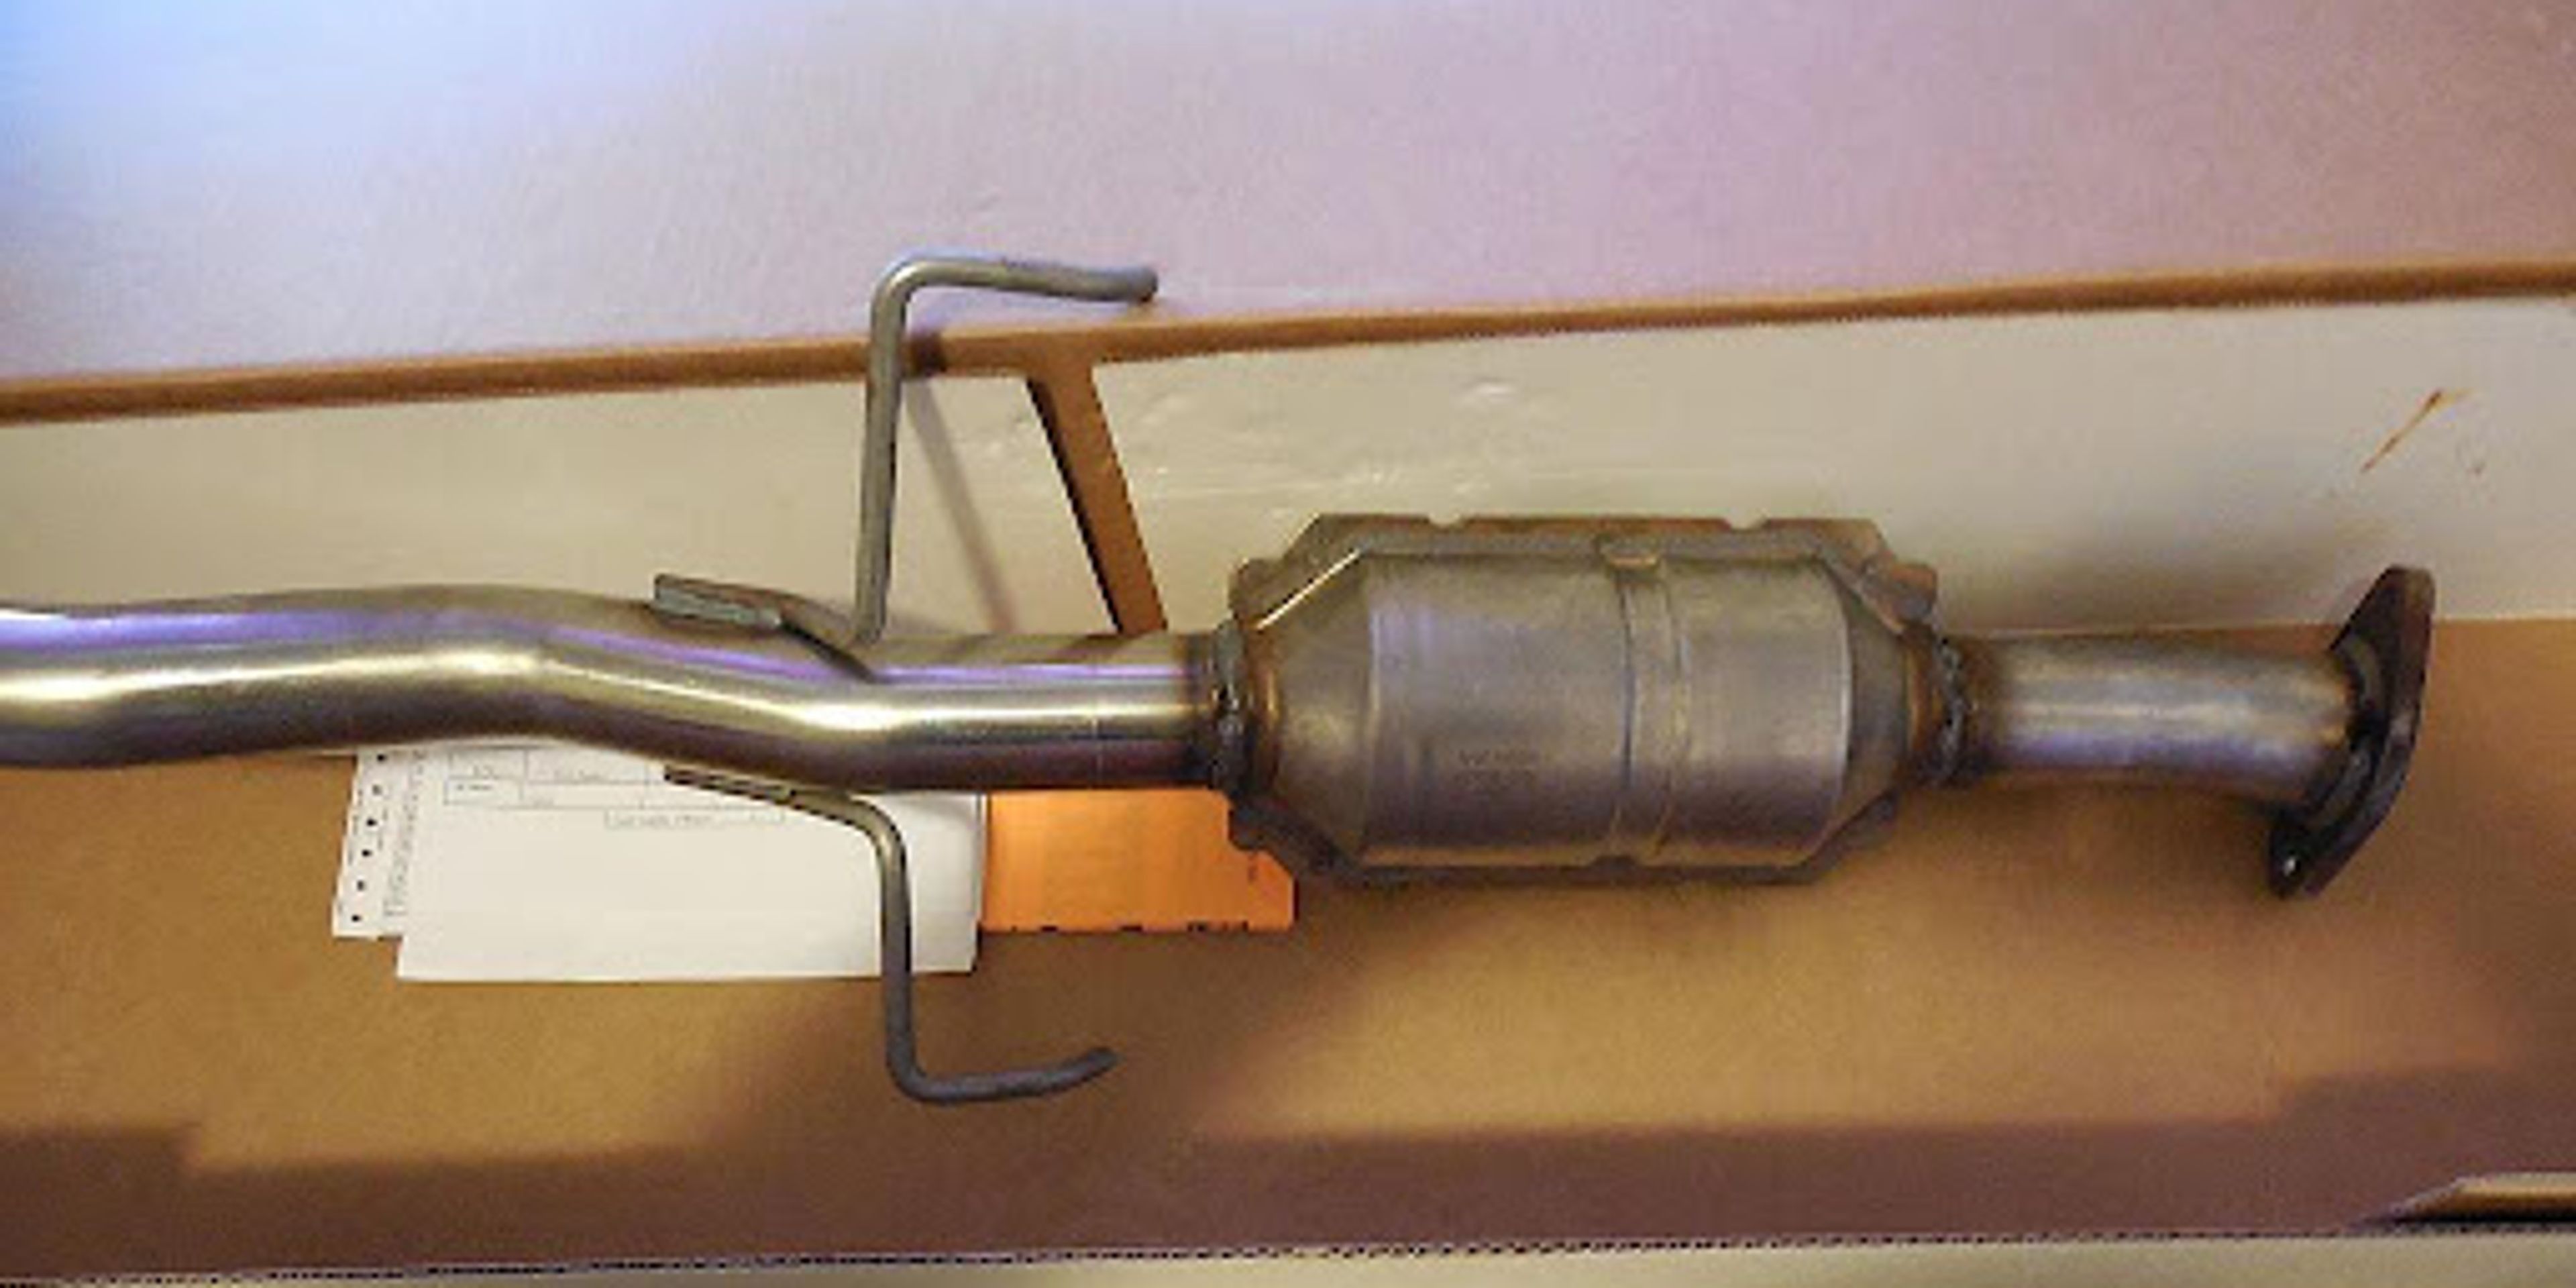 Catalytic Converters: What They Are, Why They Are Stolen, and How To Stop Thieves